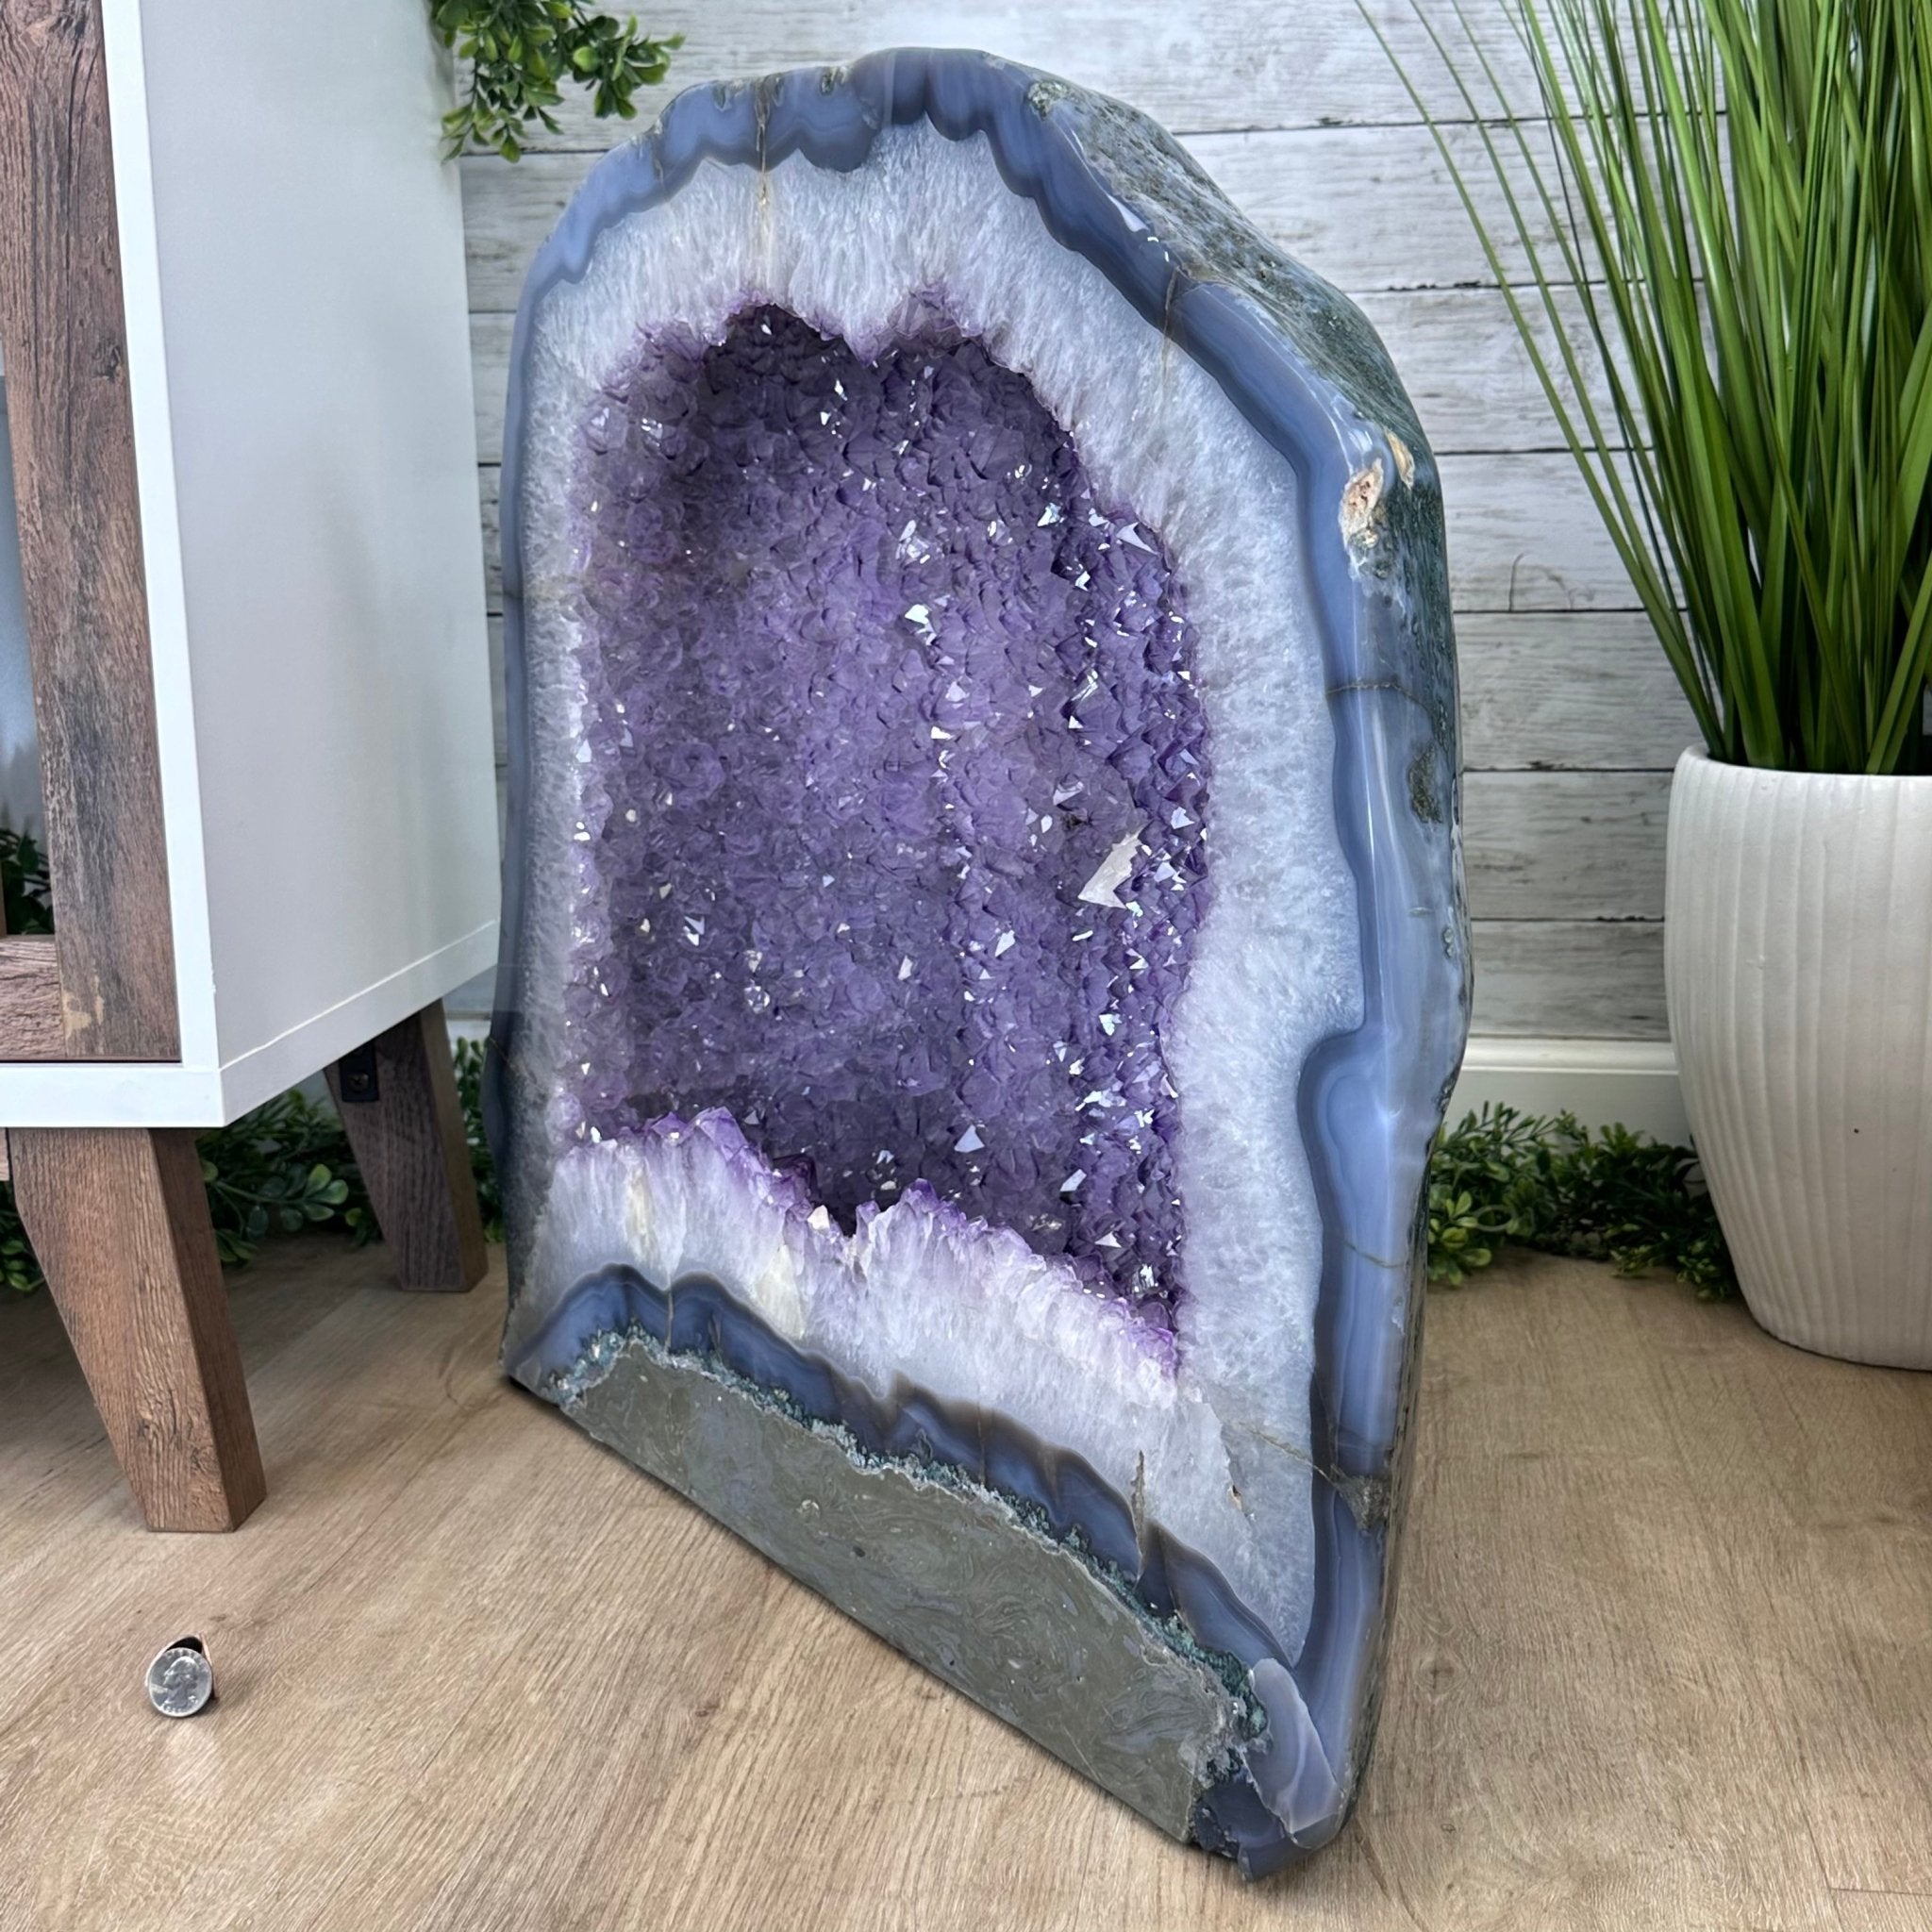 Large Extra Quality Polished Brazilian Amethyst Cathedral, 179.7 lbs & 22.75" tall Model #5602-0141 by Brazil Gems - Brazil GemsBrazil GemsLarge Extra Quality Polished Brazilian Amethyst Cathedral, 179.7 lbs & 22.75" tall Model #5602-0141 by Brazil GemsPolished Cathedrals5602-0141